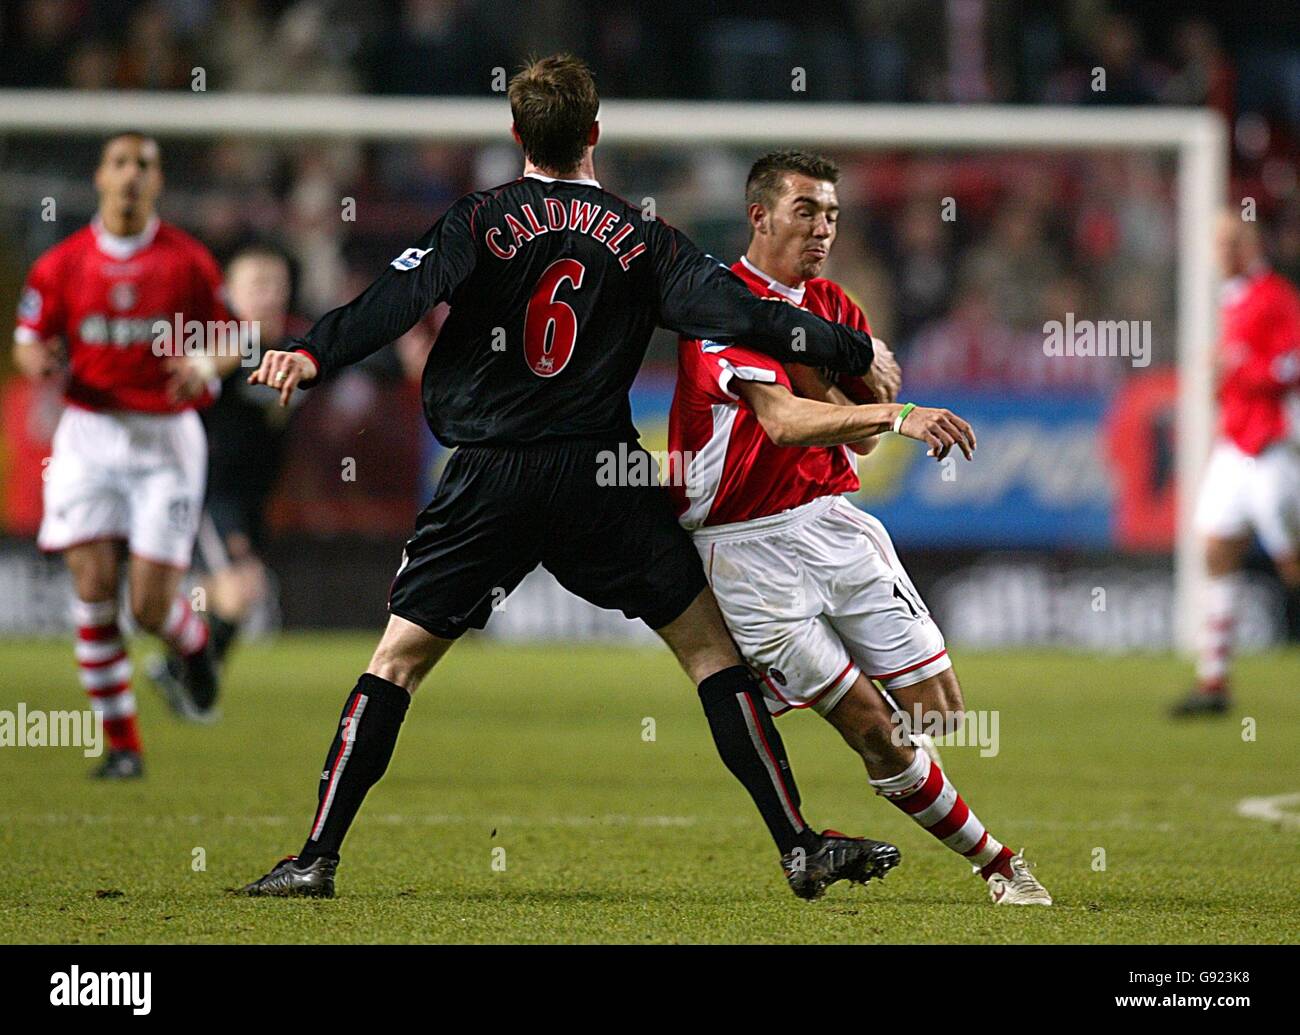 Sunderland's Stephen Caldwell drags Charlton Athletic's Darren Ambrose back by the neck and is subsequently booked Stock Photo